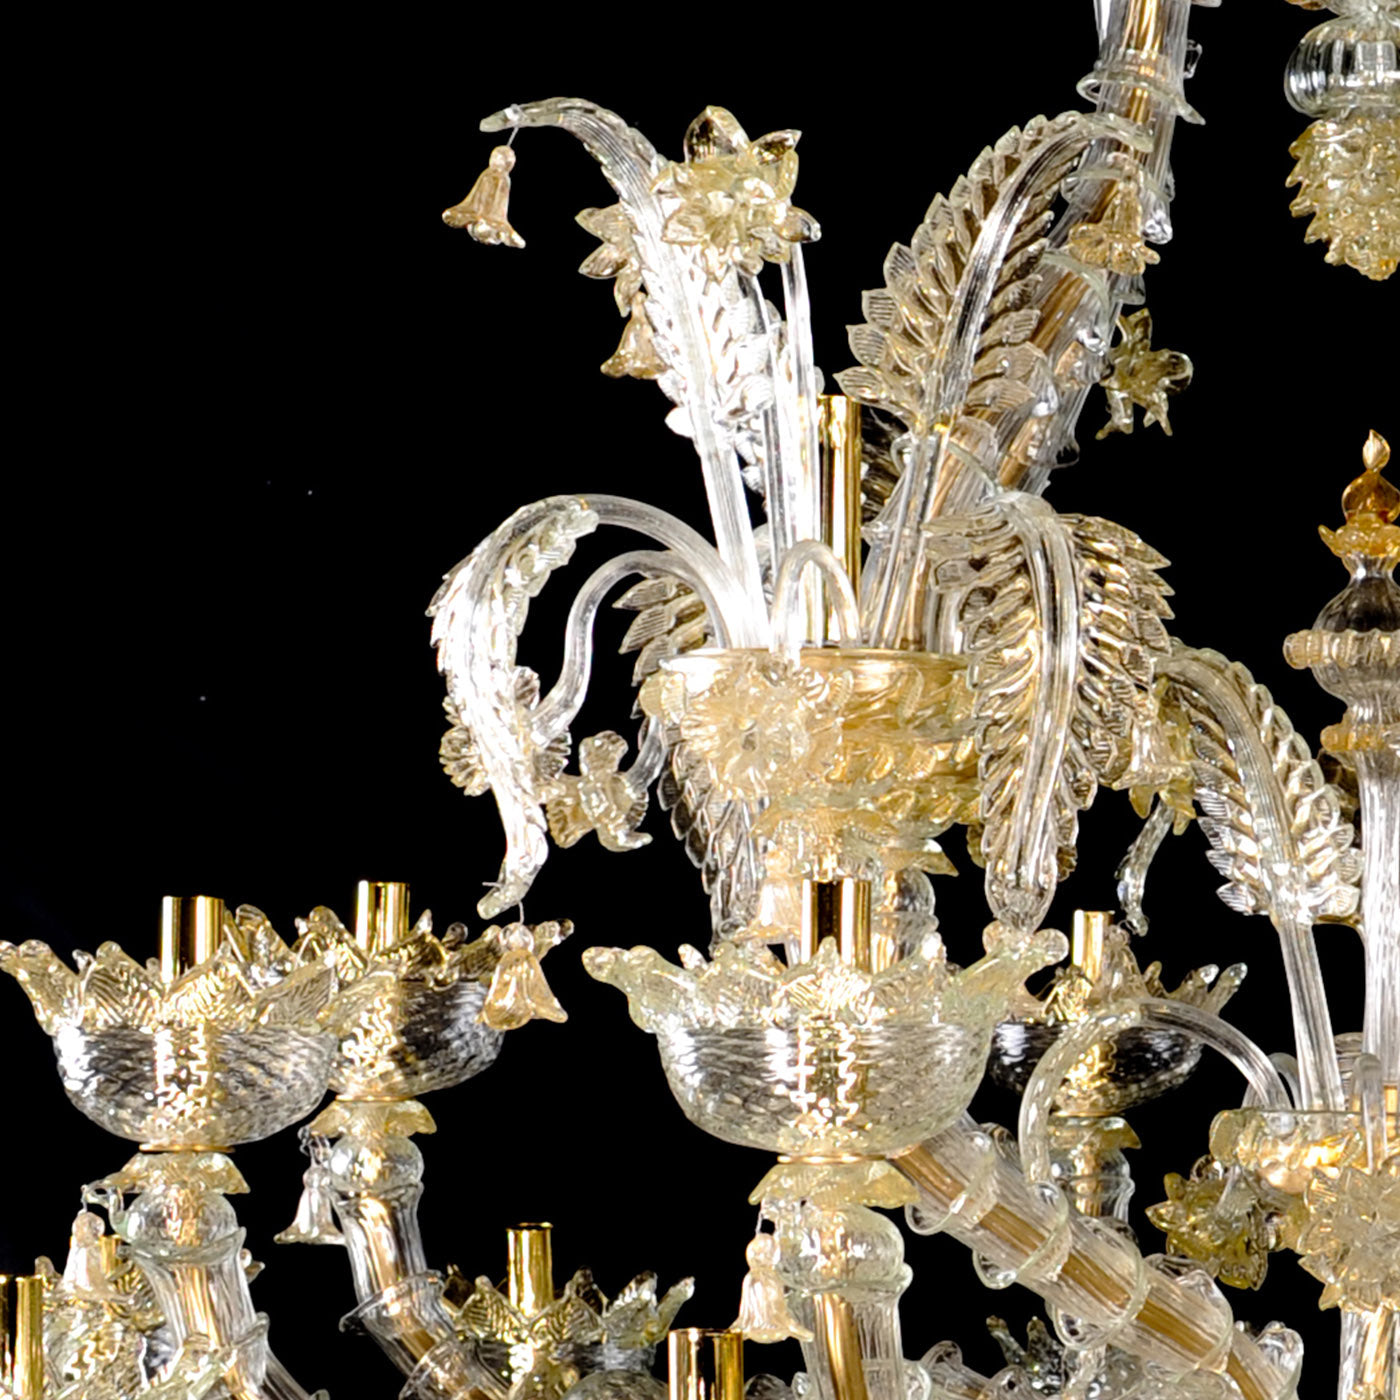 Rezzonico-style Gold and Crystal Chandelier #7 - Alternative view 3